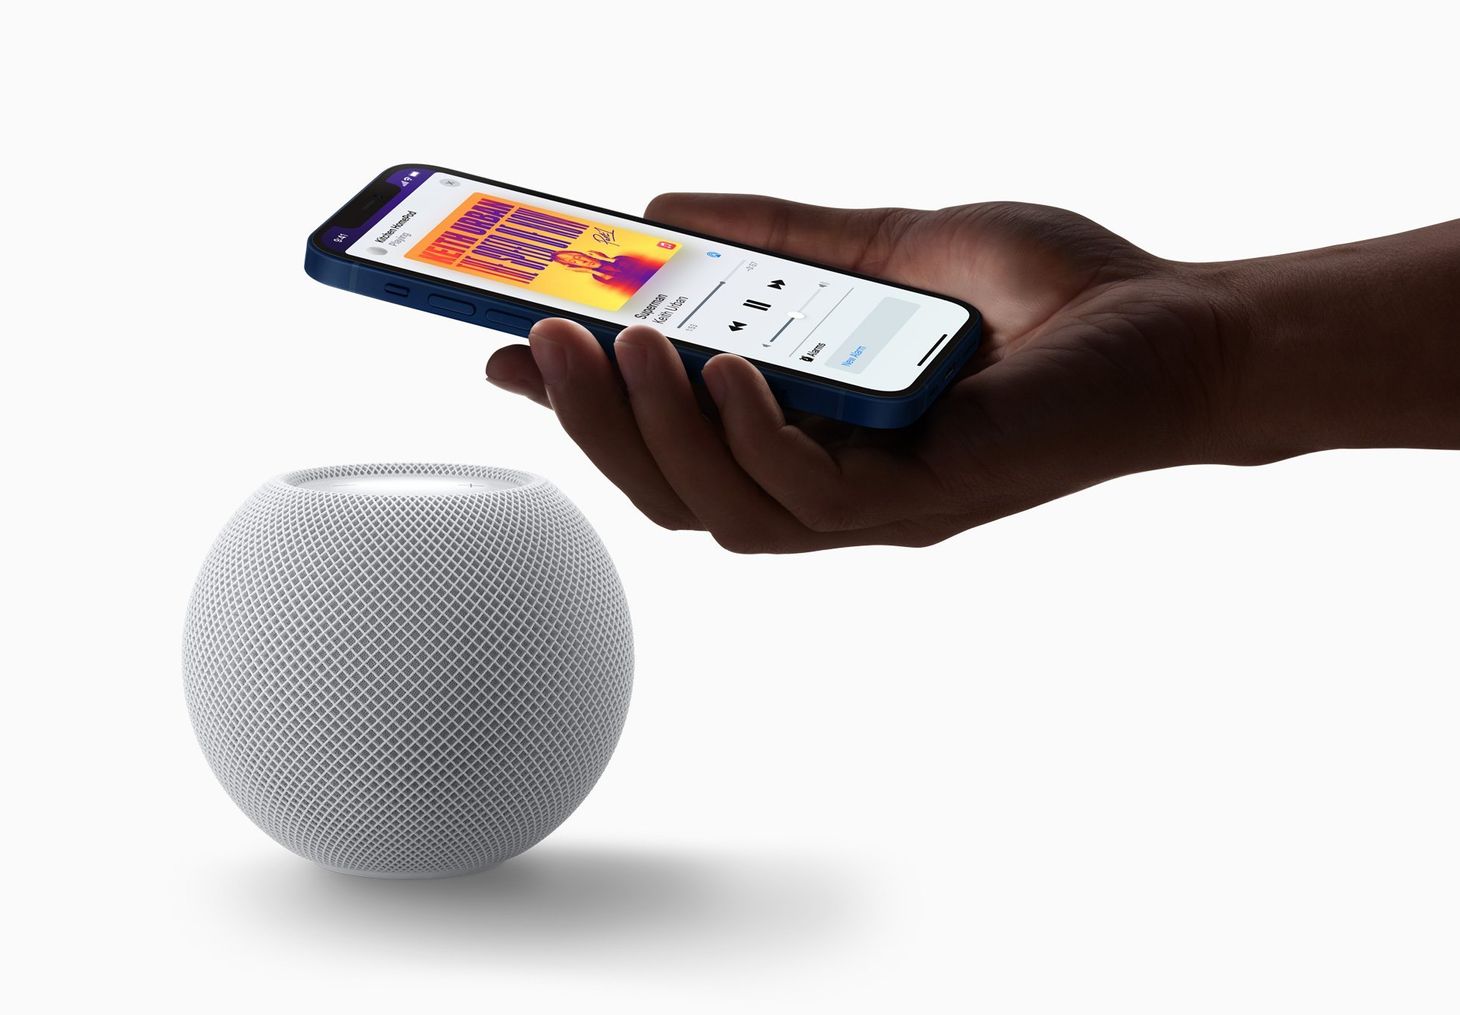 Apple's HomePod Mini is just too adorable